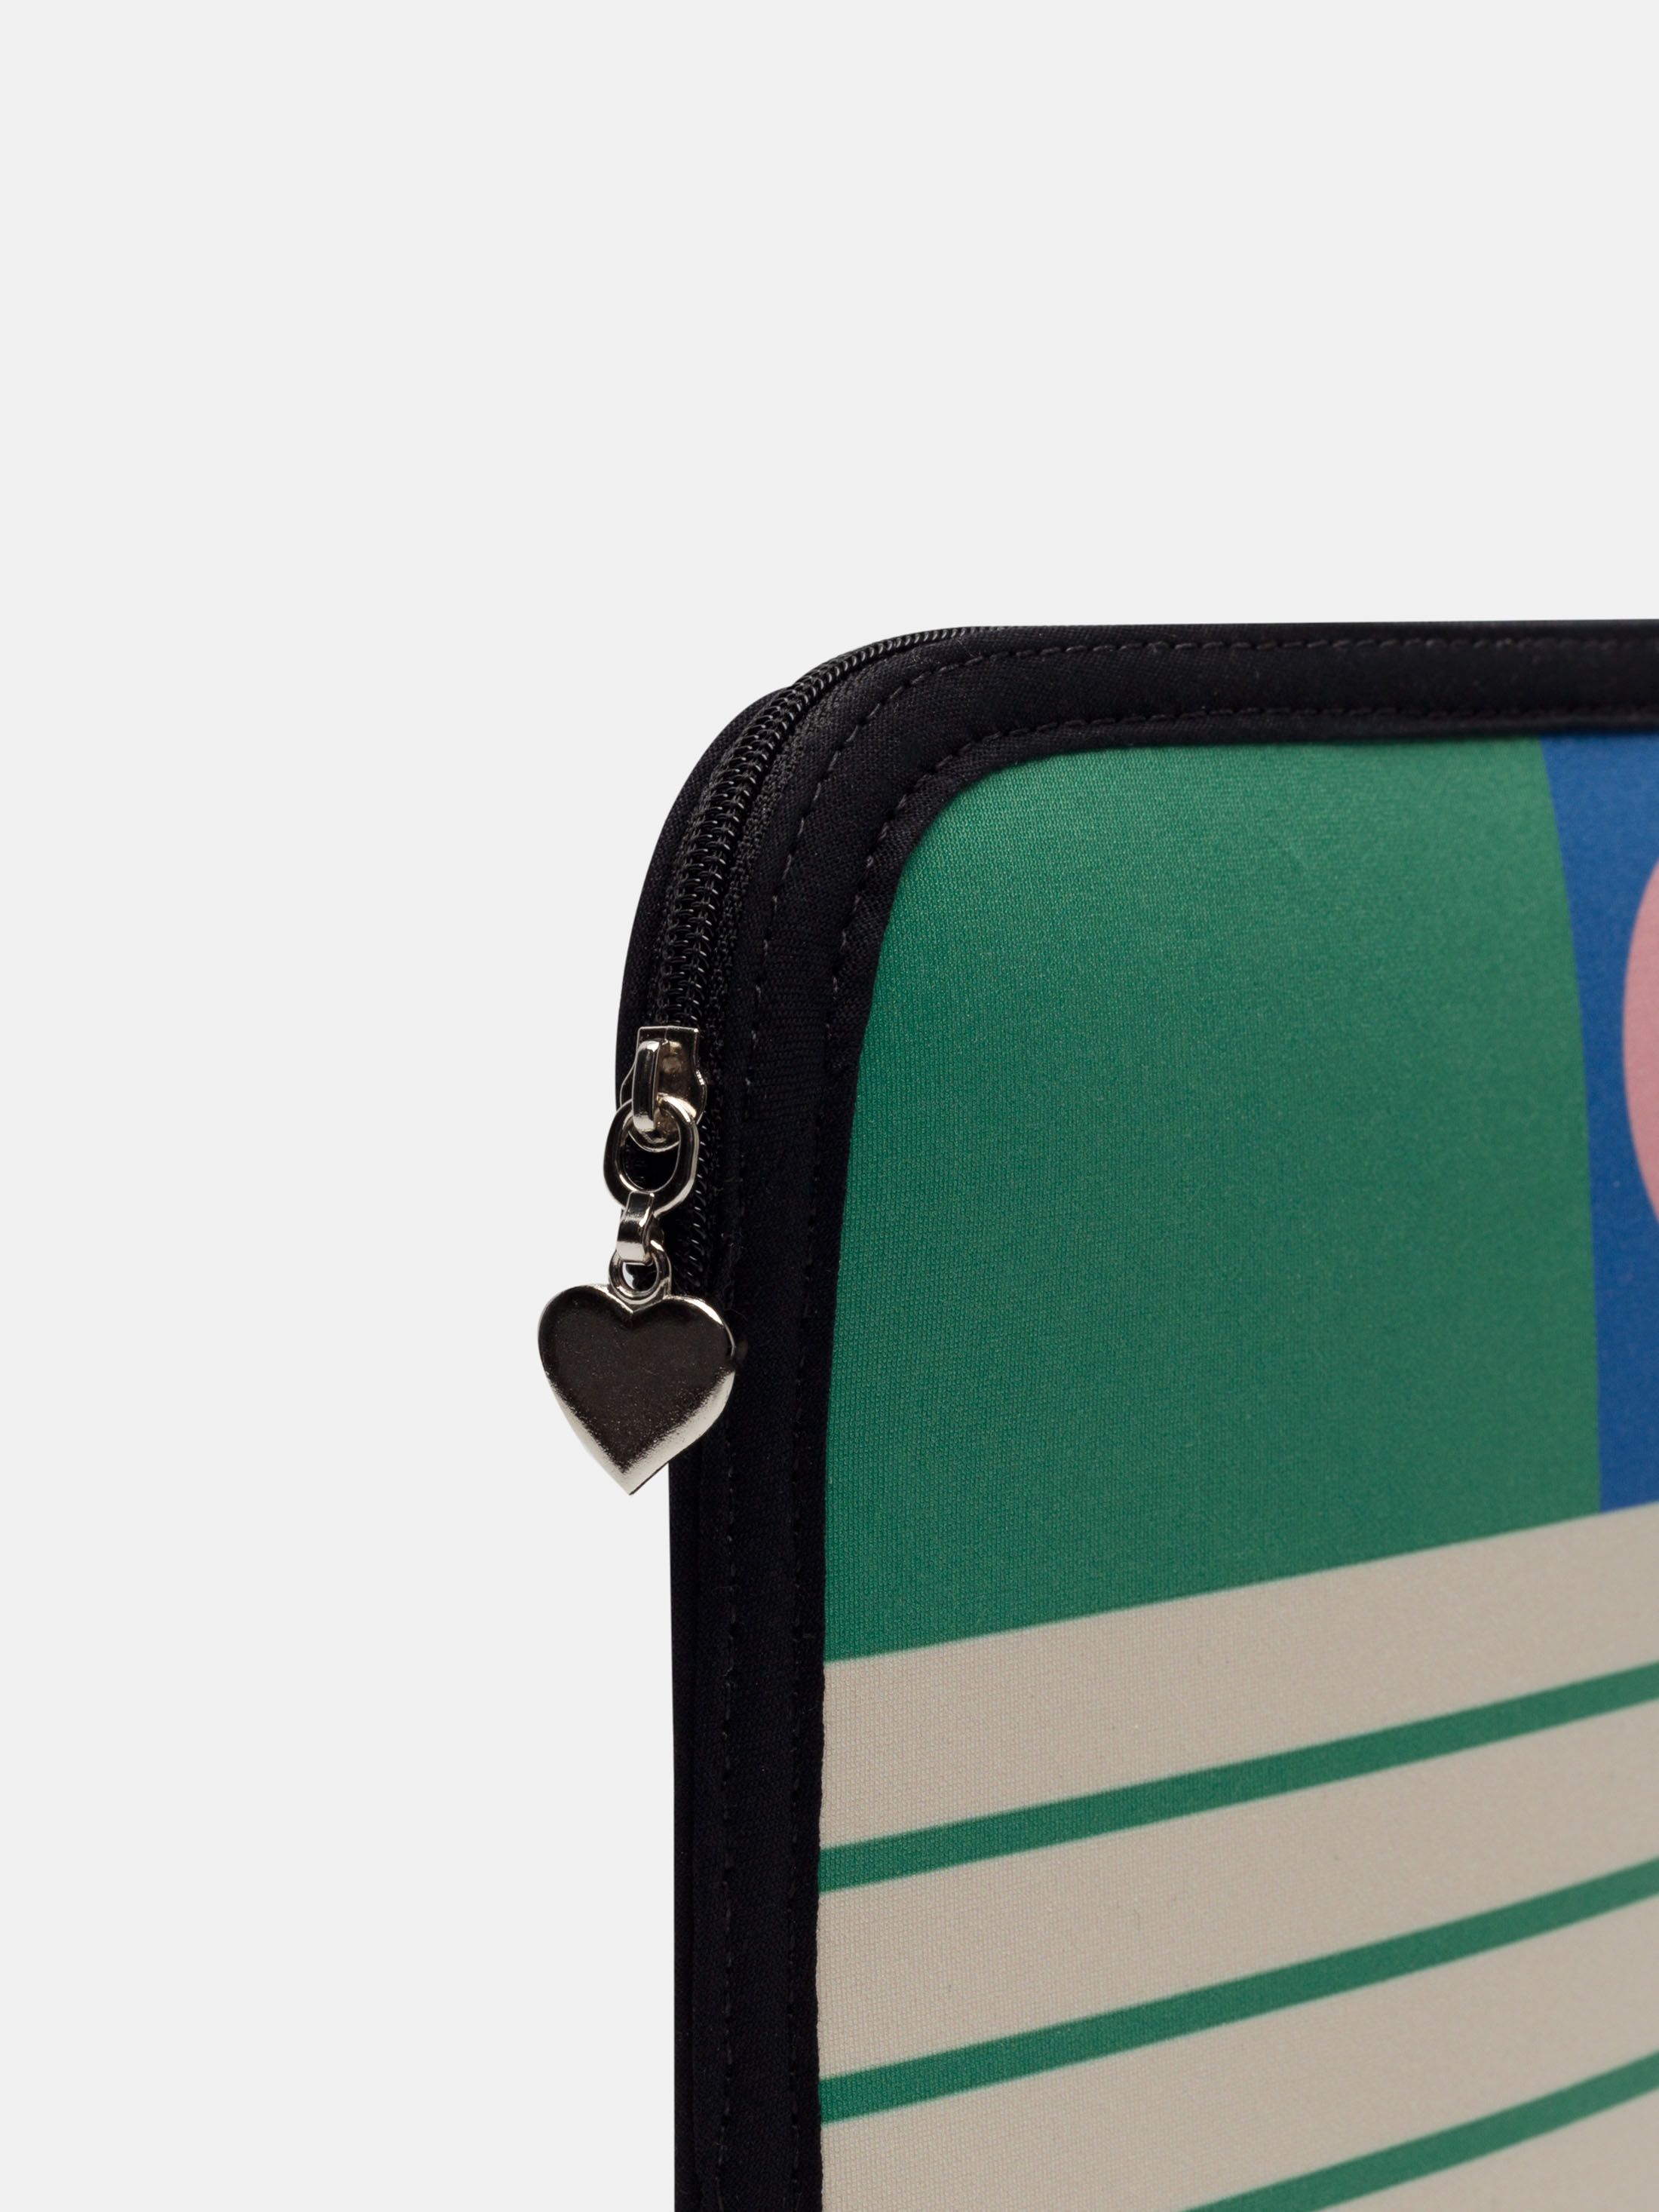 make your own ipad case with logos